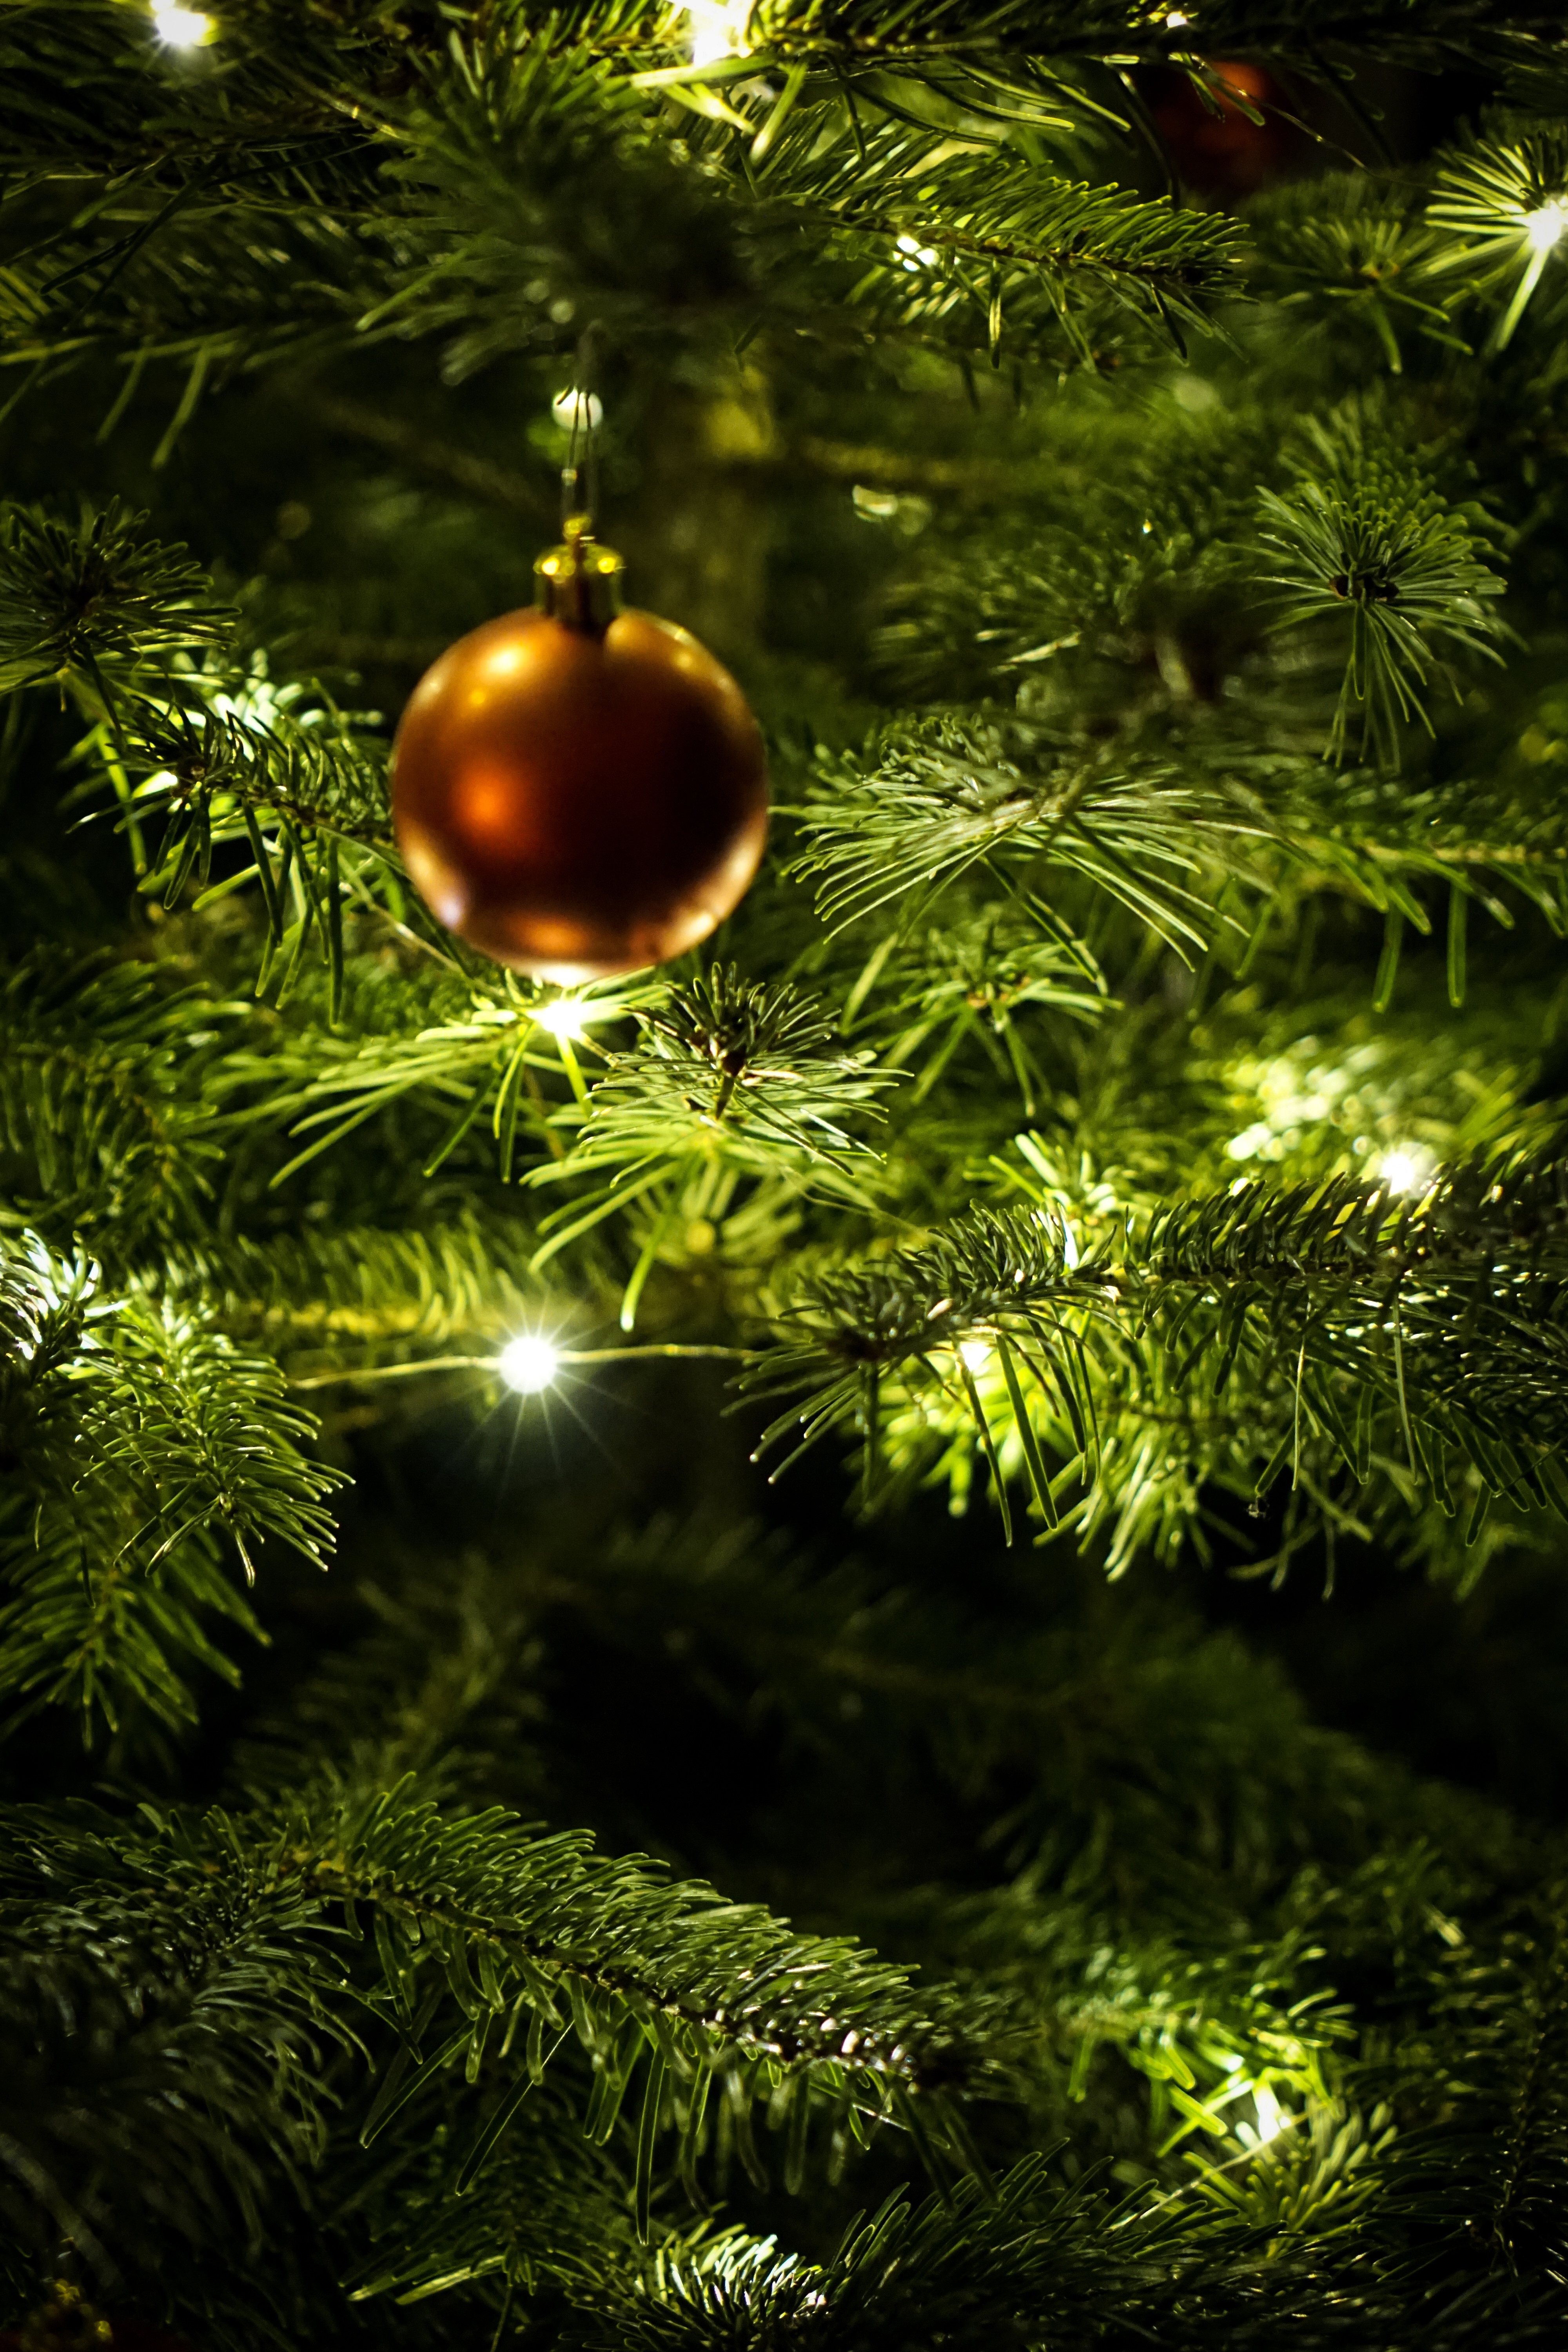 Cool Backgrounds holidays, christmas tree, garland, ball New Year